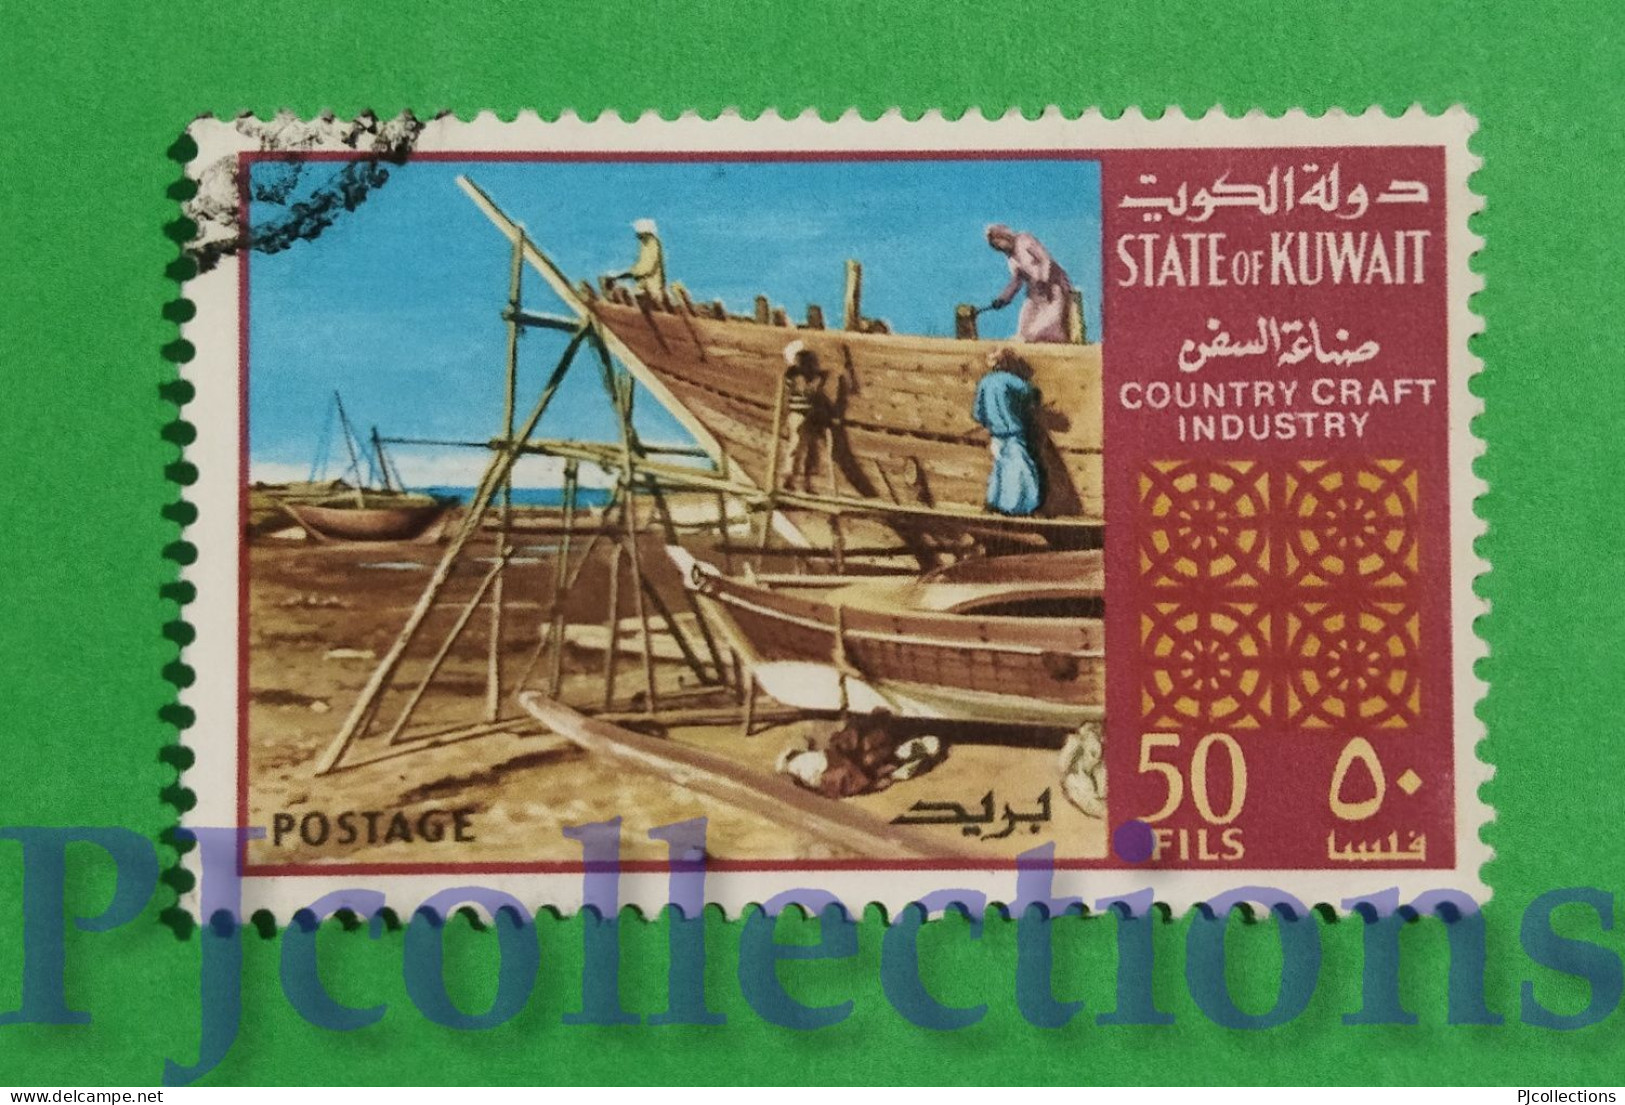 S358- KUWAIT 1970 COUNTRY CRAFT INDUSTRY 50f USATO - USED - Oblitérés